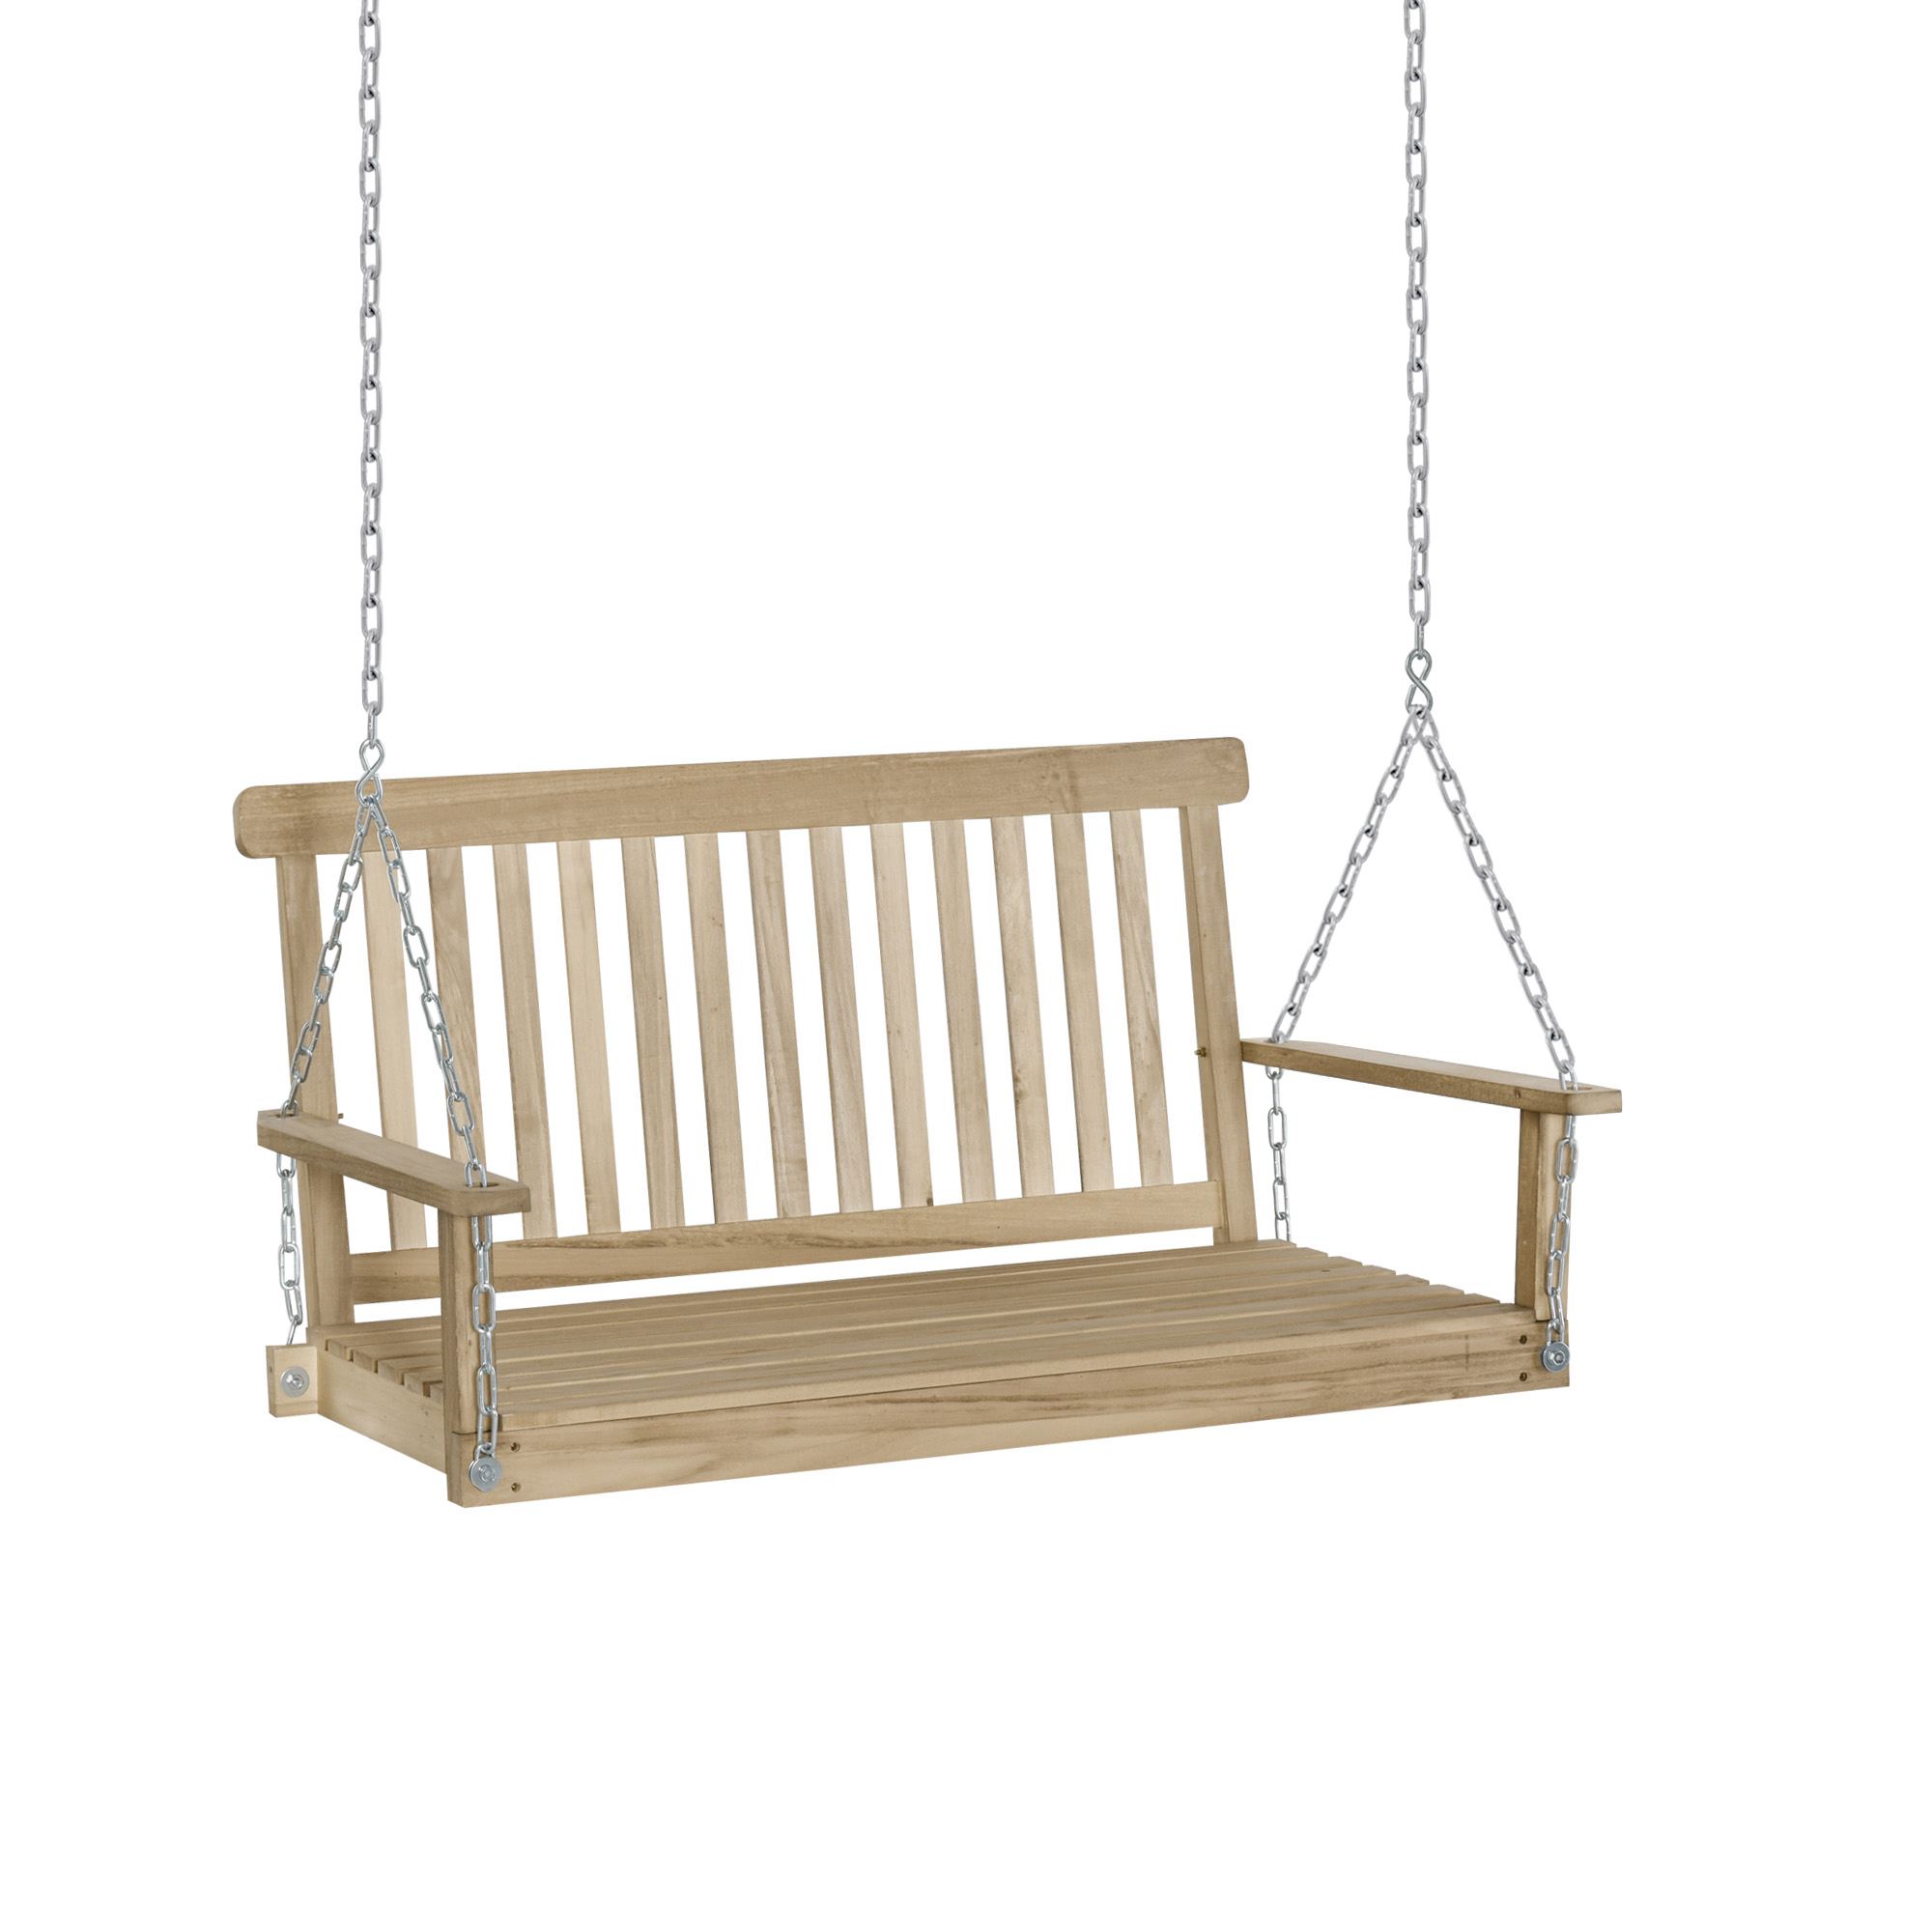 Outsunny 2-Person Heavy Duty Hanging Swinging Outside Front Bench w/ Fir Wood, Natural